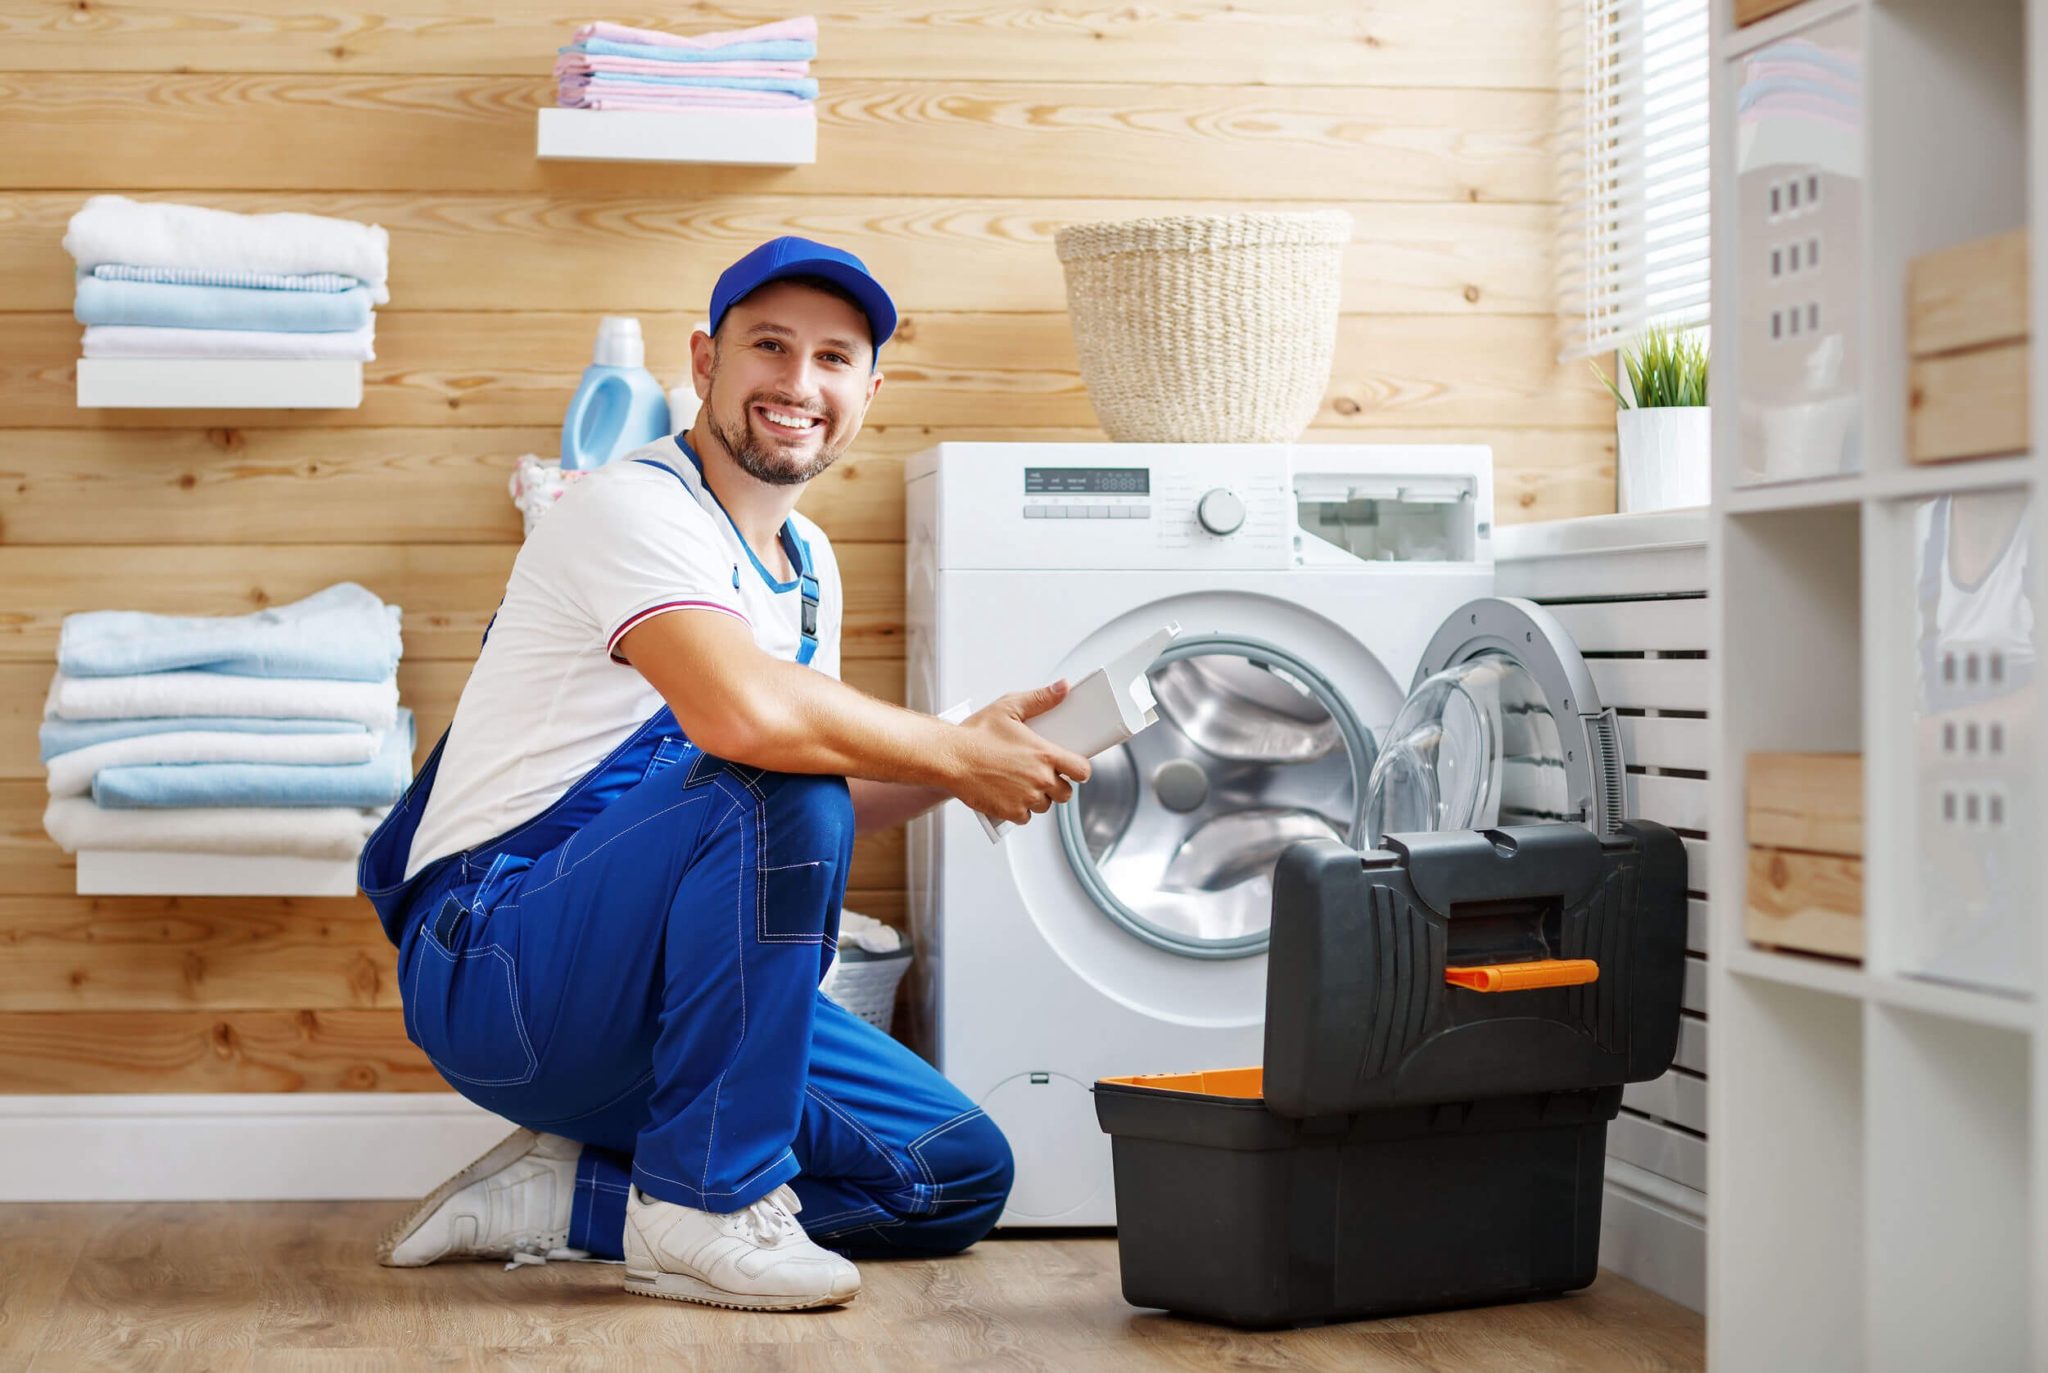 The role of the professional appliance repair technician in our life